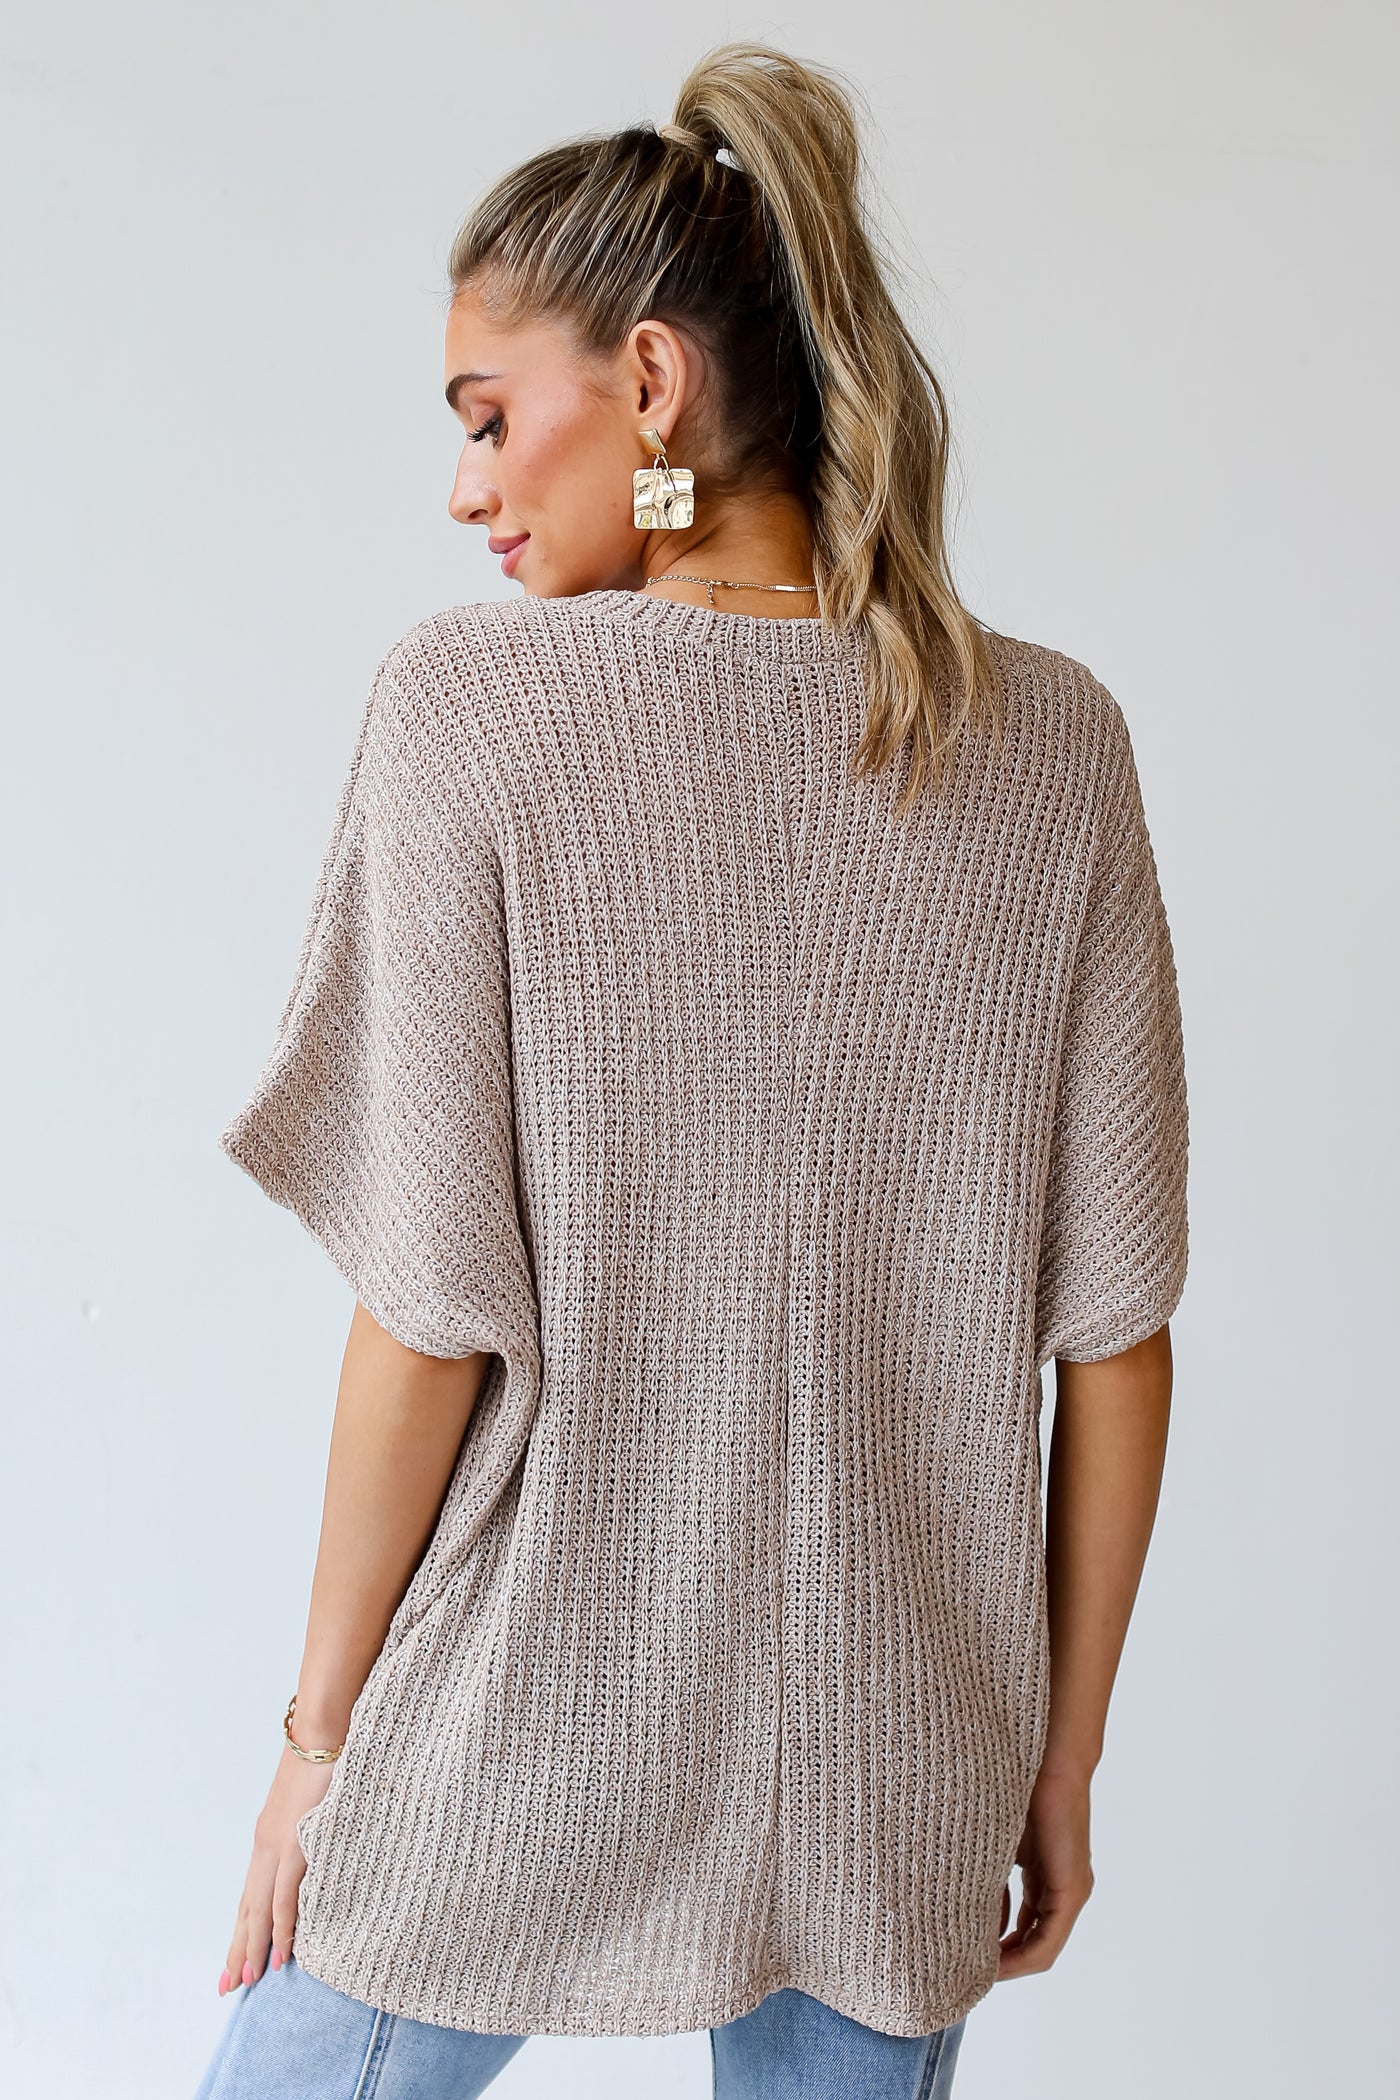 taupe Lightweight Knit Top back view